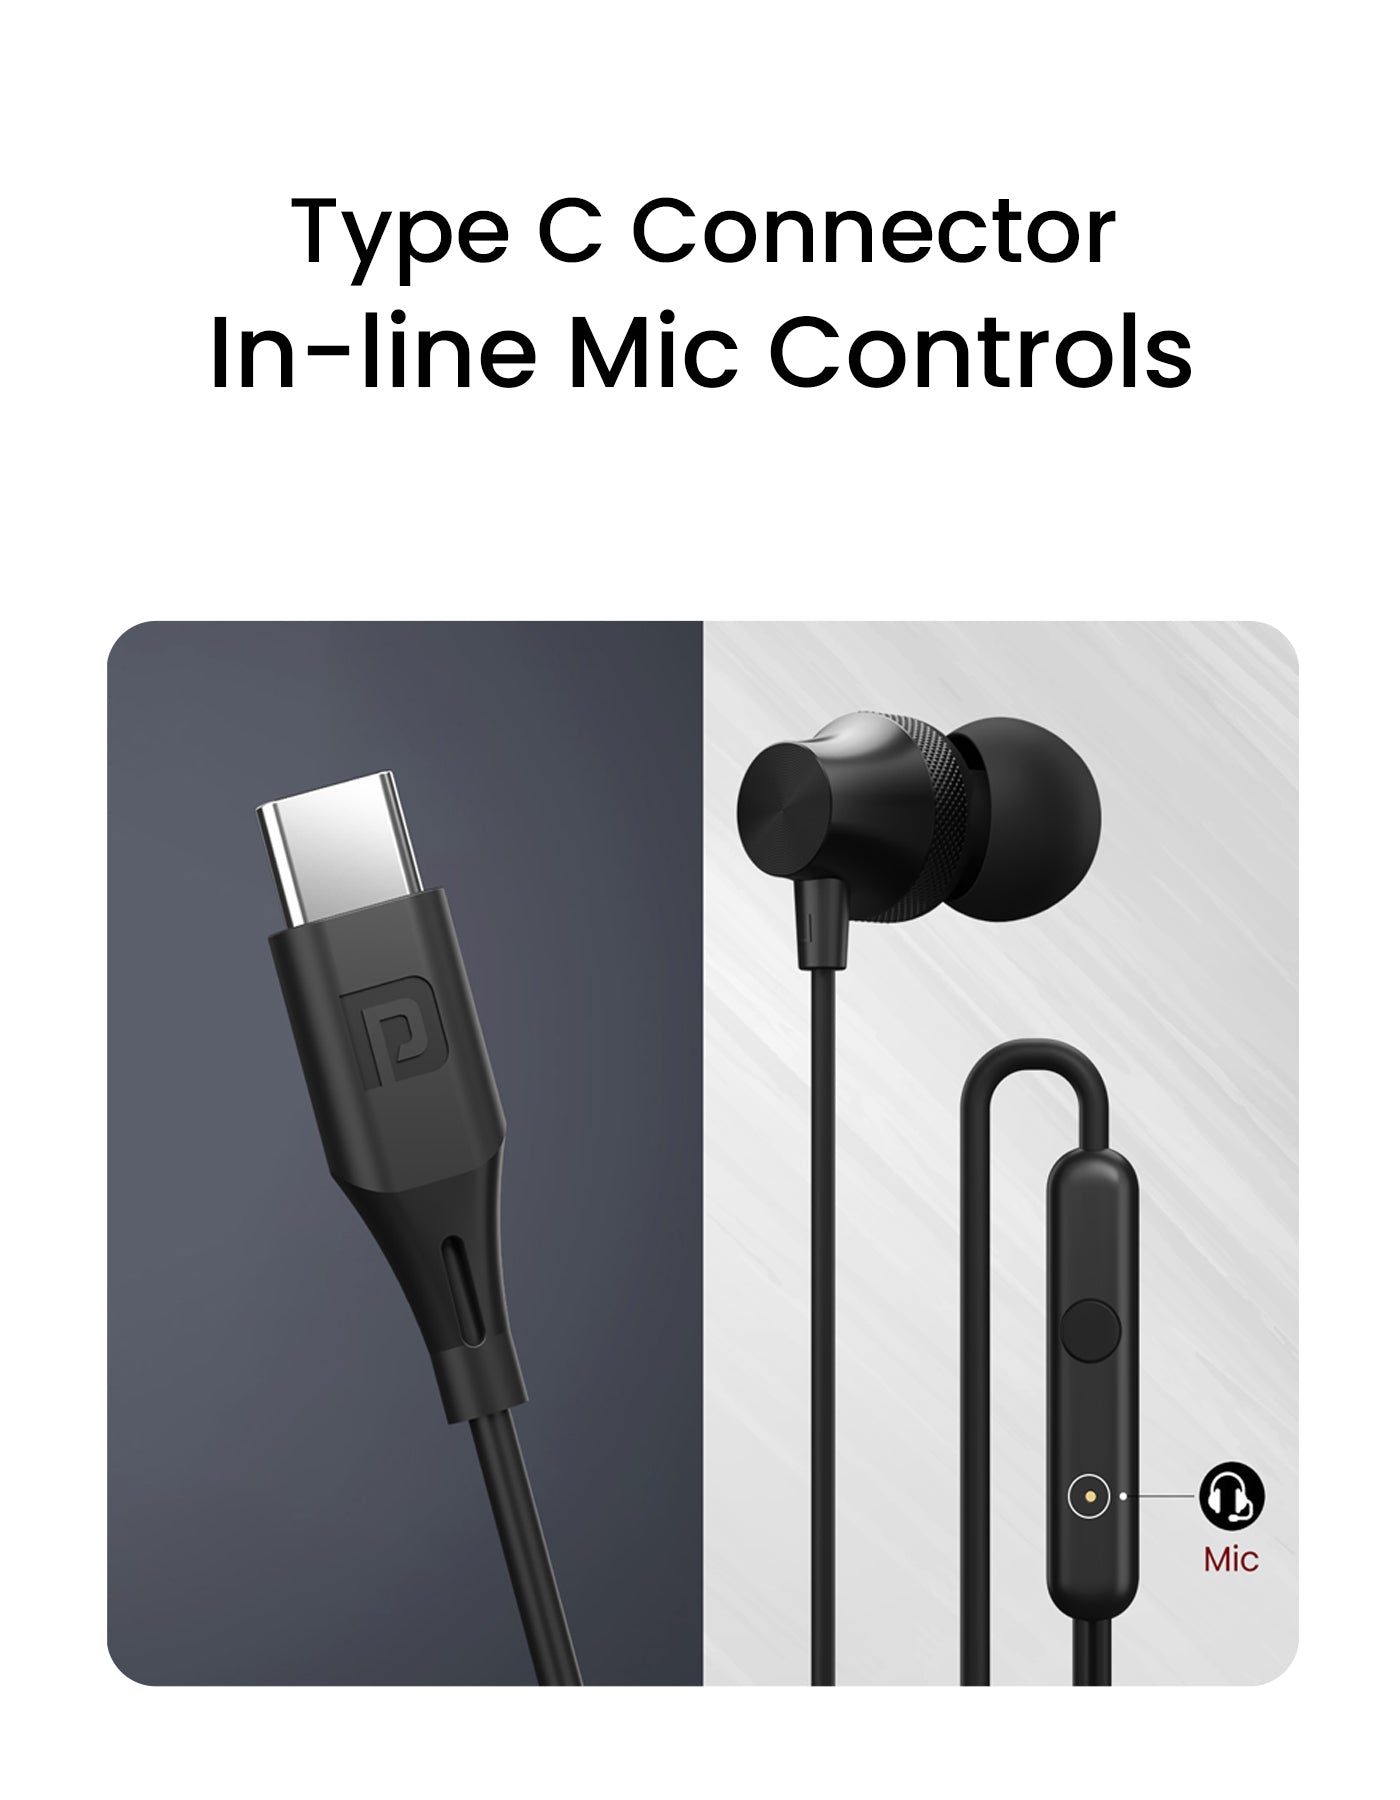 Portronics conch beta c type c type c wire earphone with type c connector and in-line mic controls